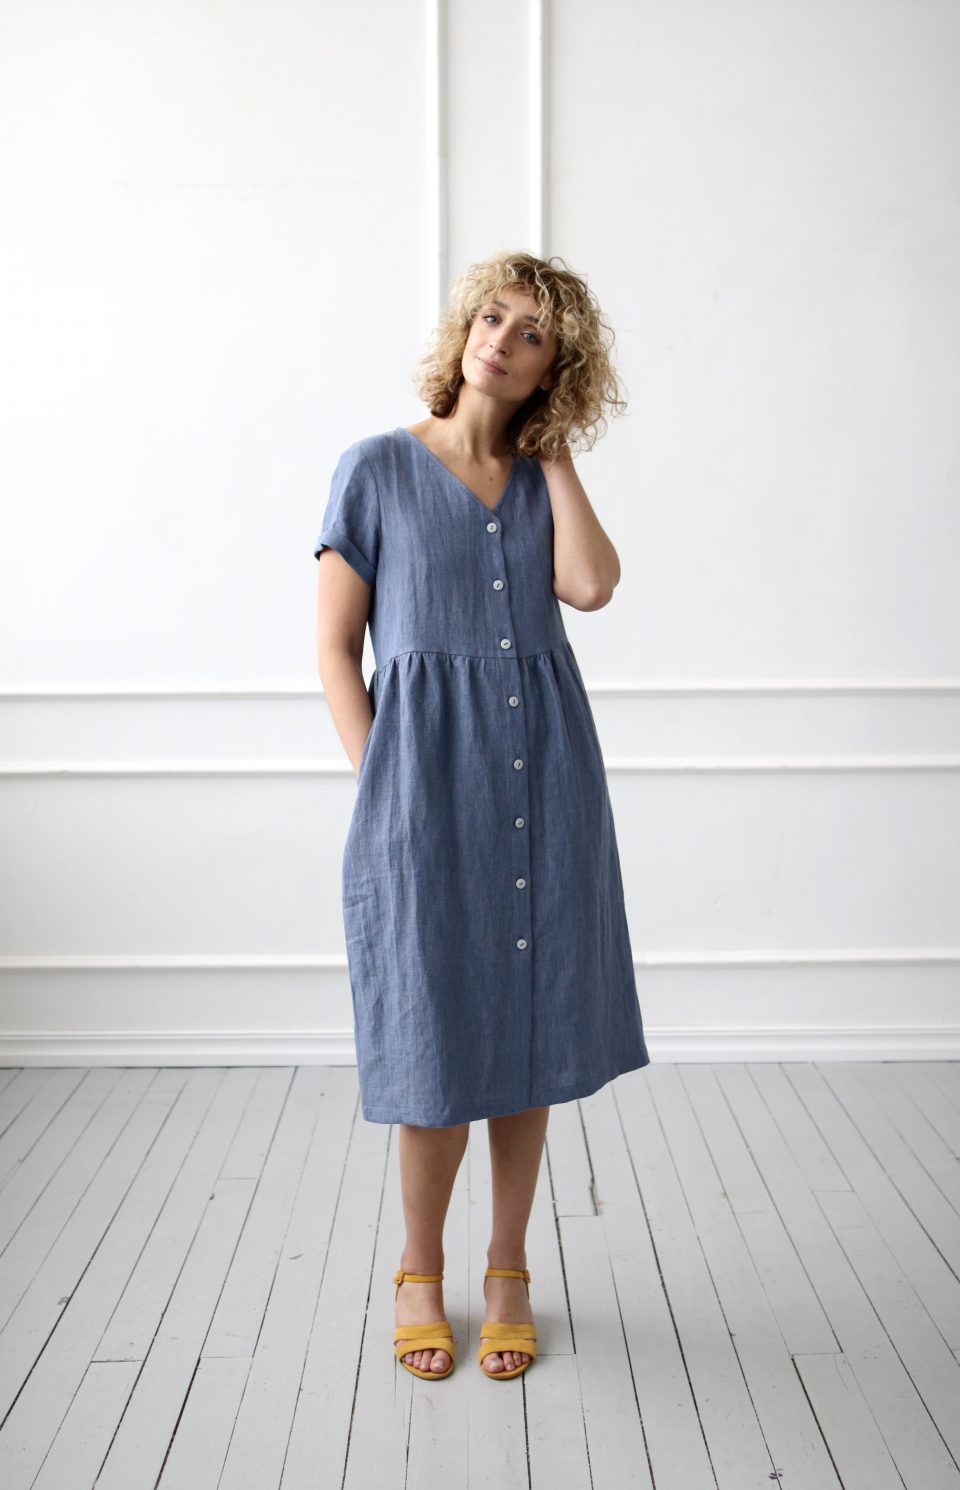 Linen dress with button closure | Dress | Sustainable clothing | OffOn clothing